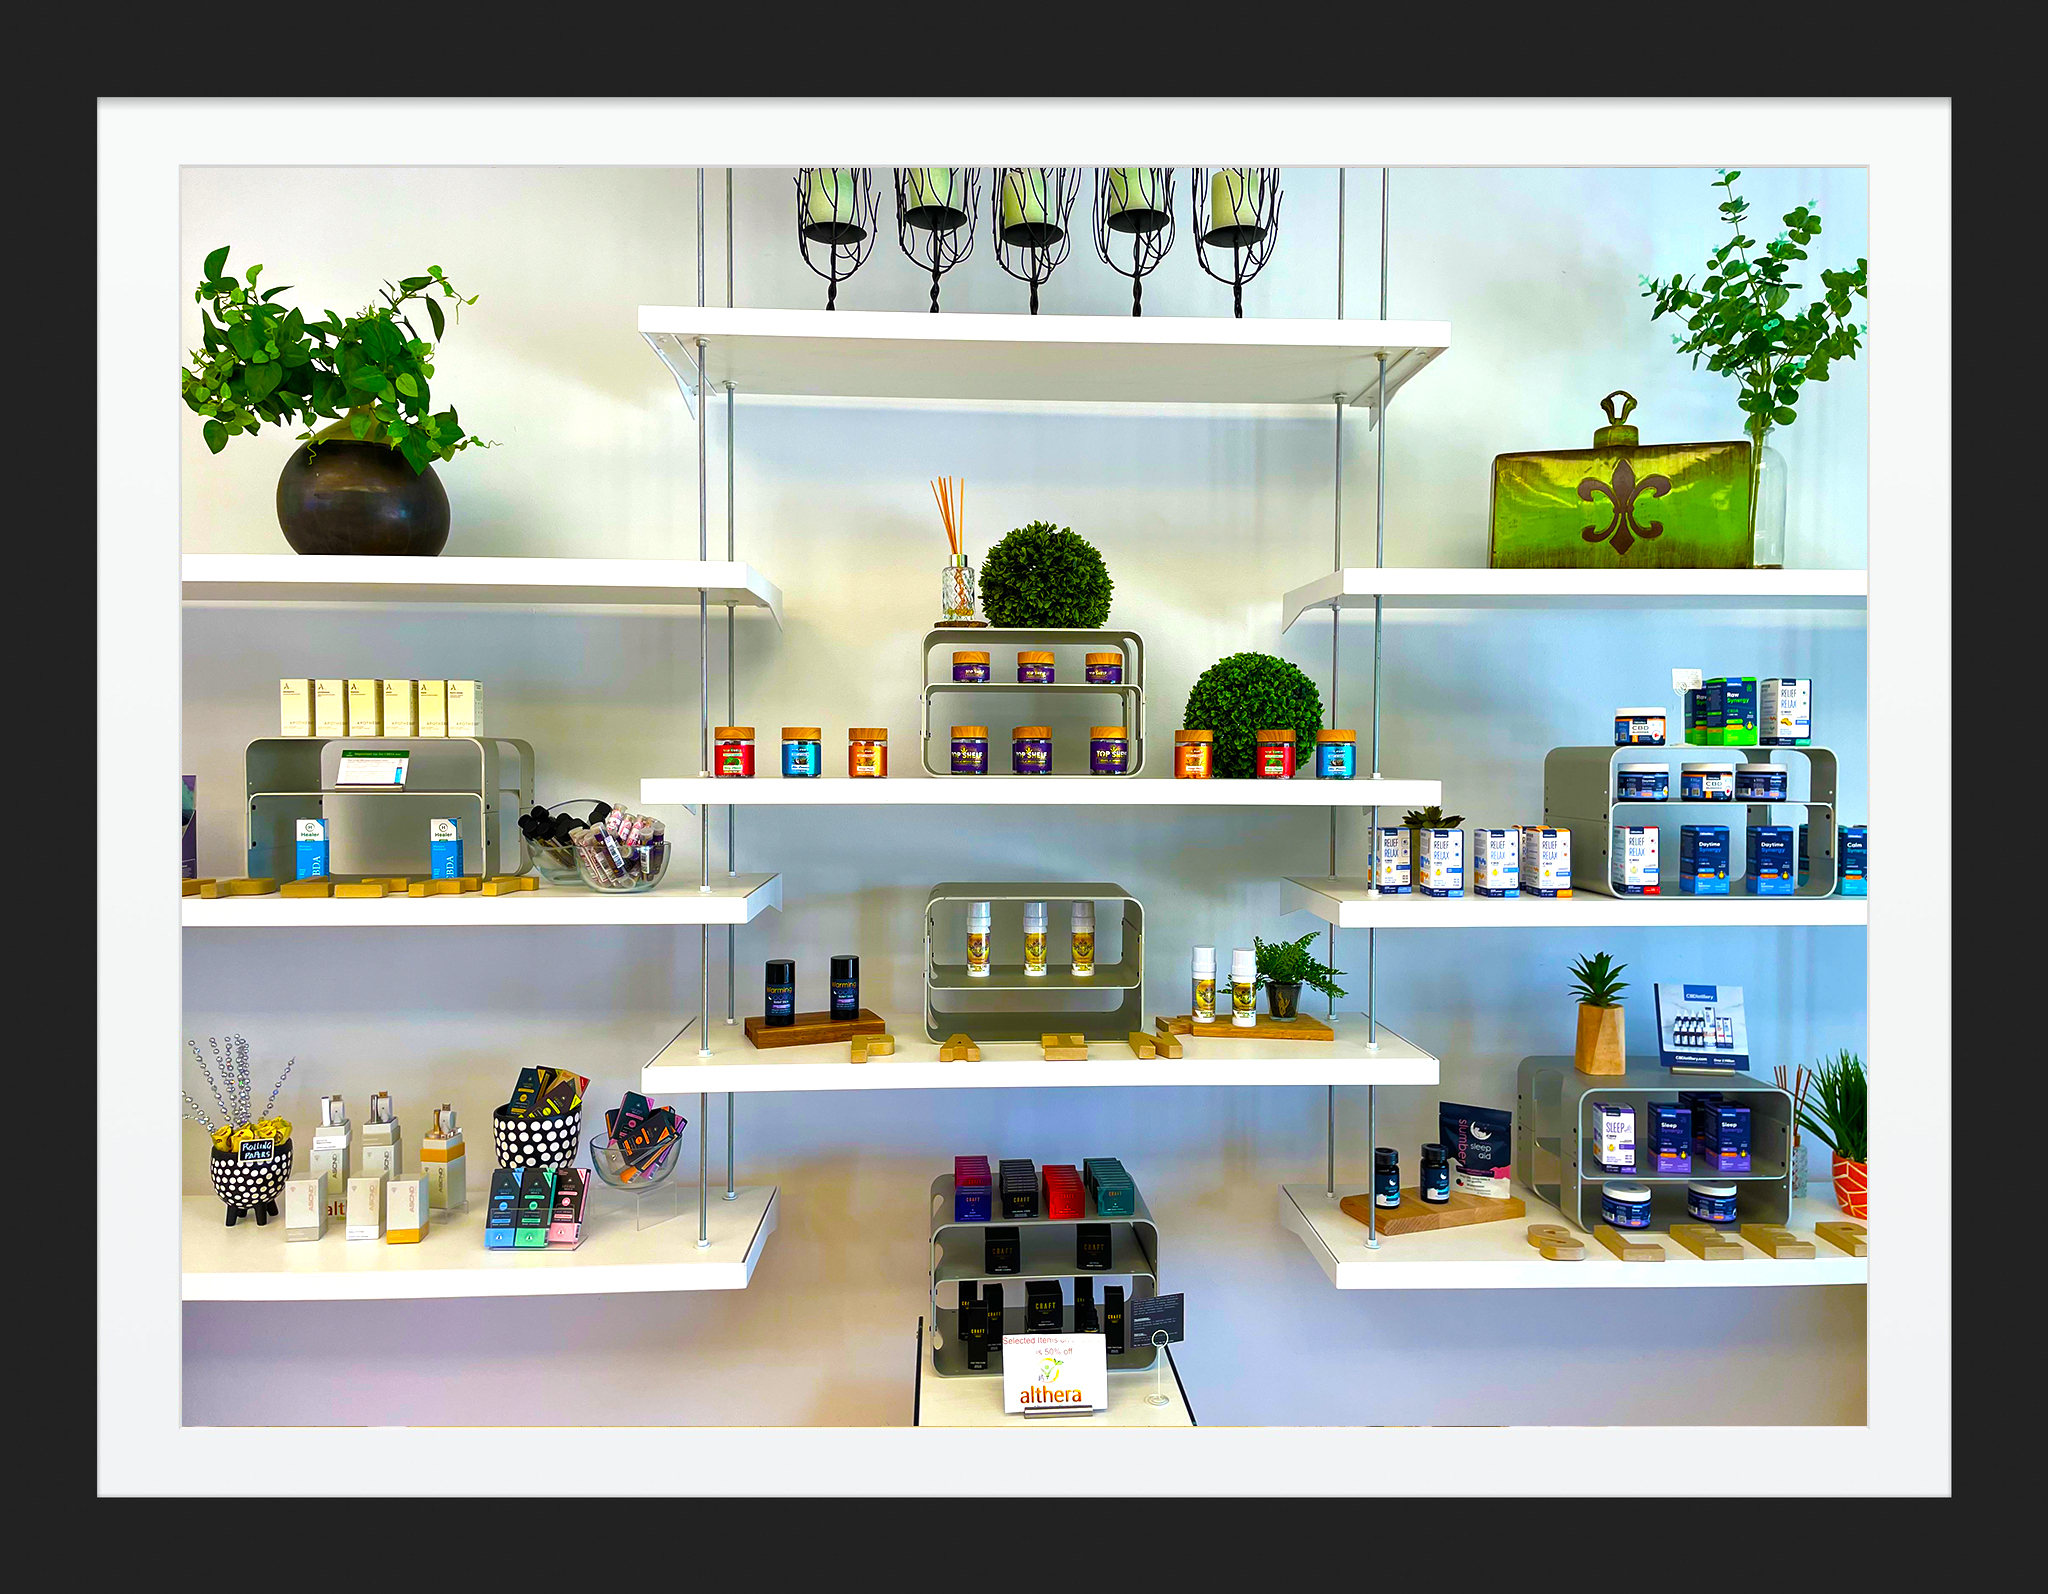 Shop for Health and wellness products in our Albuquerque Store